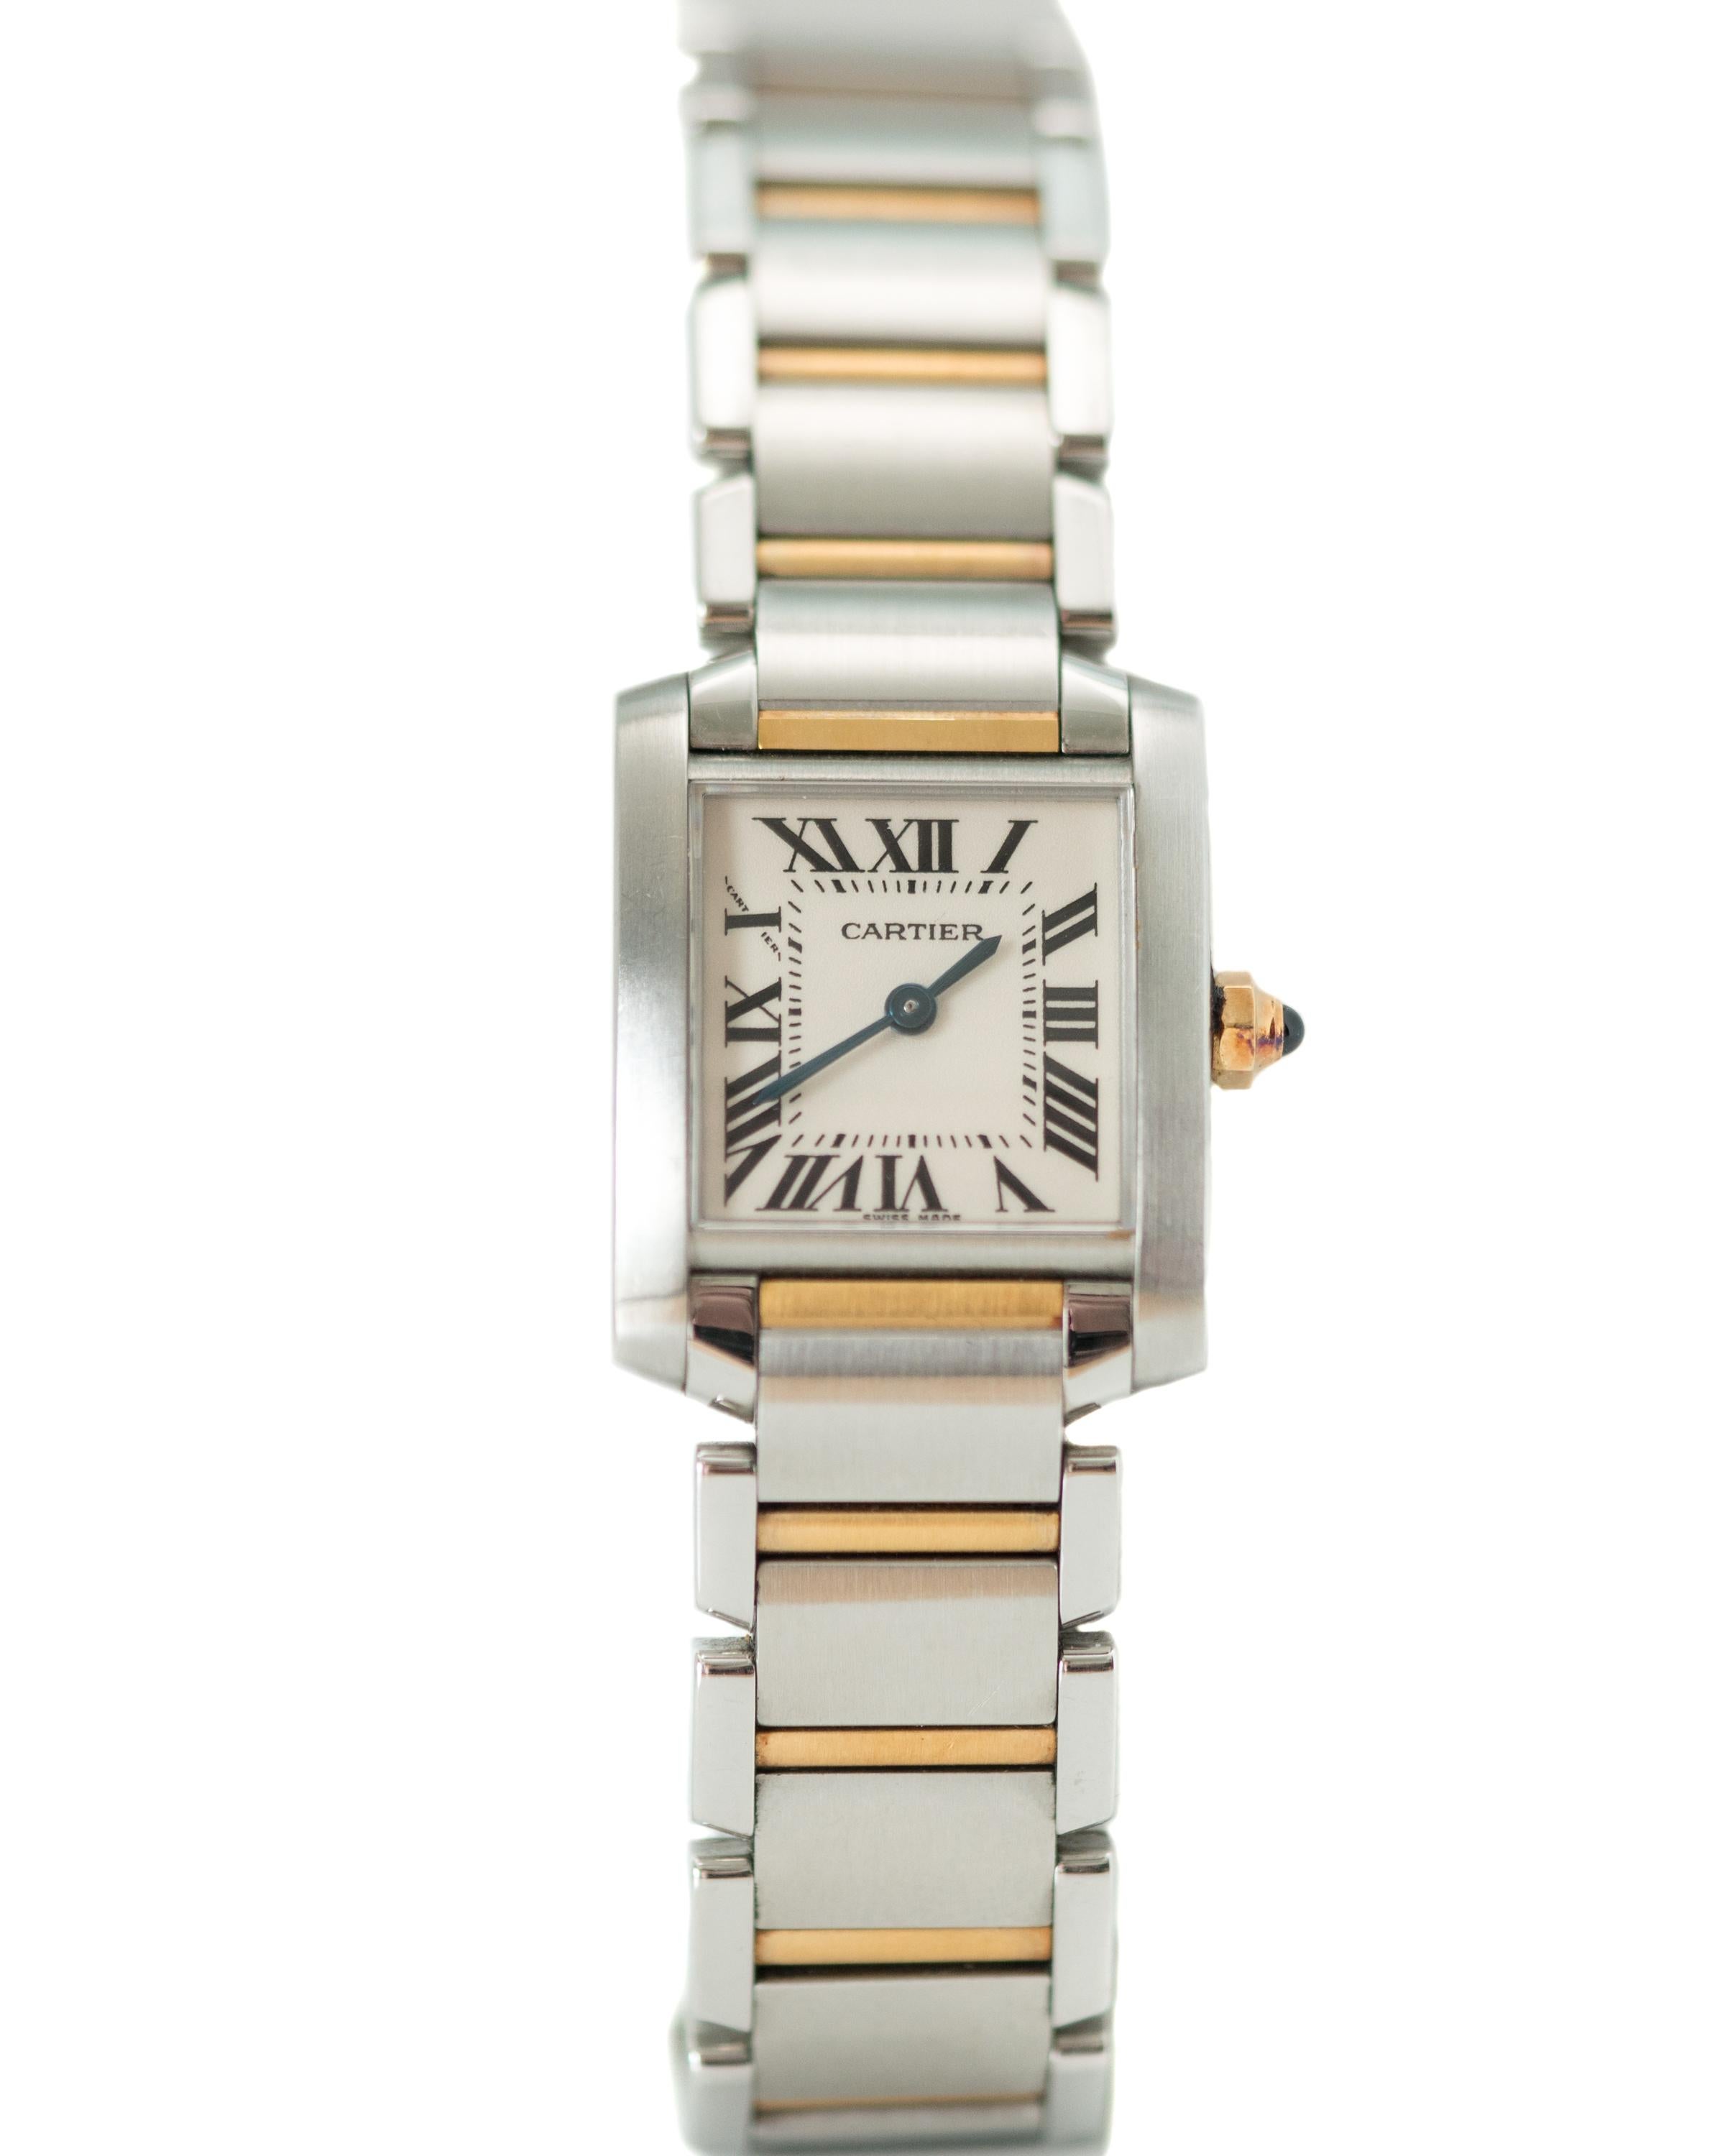 1998 Ladies Cartier Tank Française Wrist Watch - 18 Karat Yellow Gold, Stainless Steel

Features:
Model Reference: 2384
Comes with Red Suede Travel Pouch & Cartier Certificate
18 Karat Yellow Gold and Stainless Steel
Case measures 26 x 20